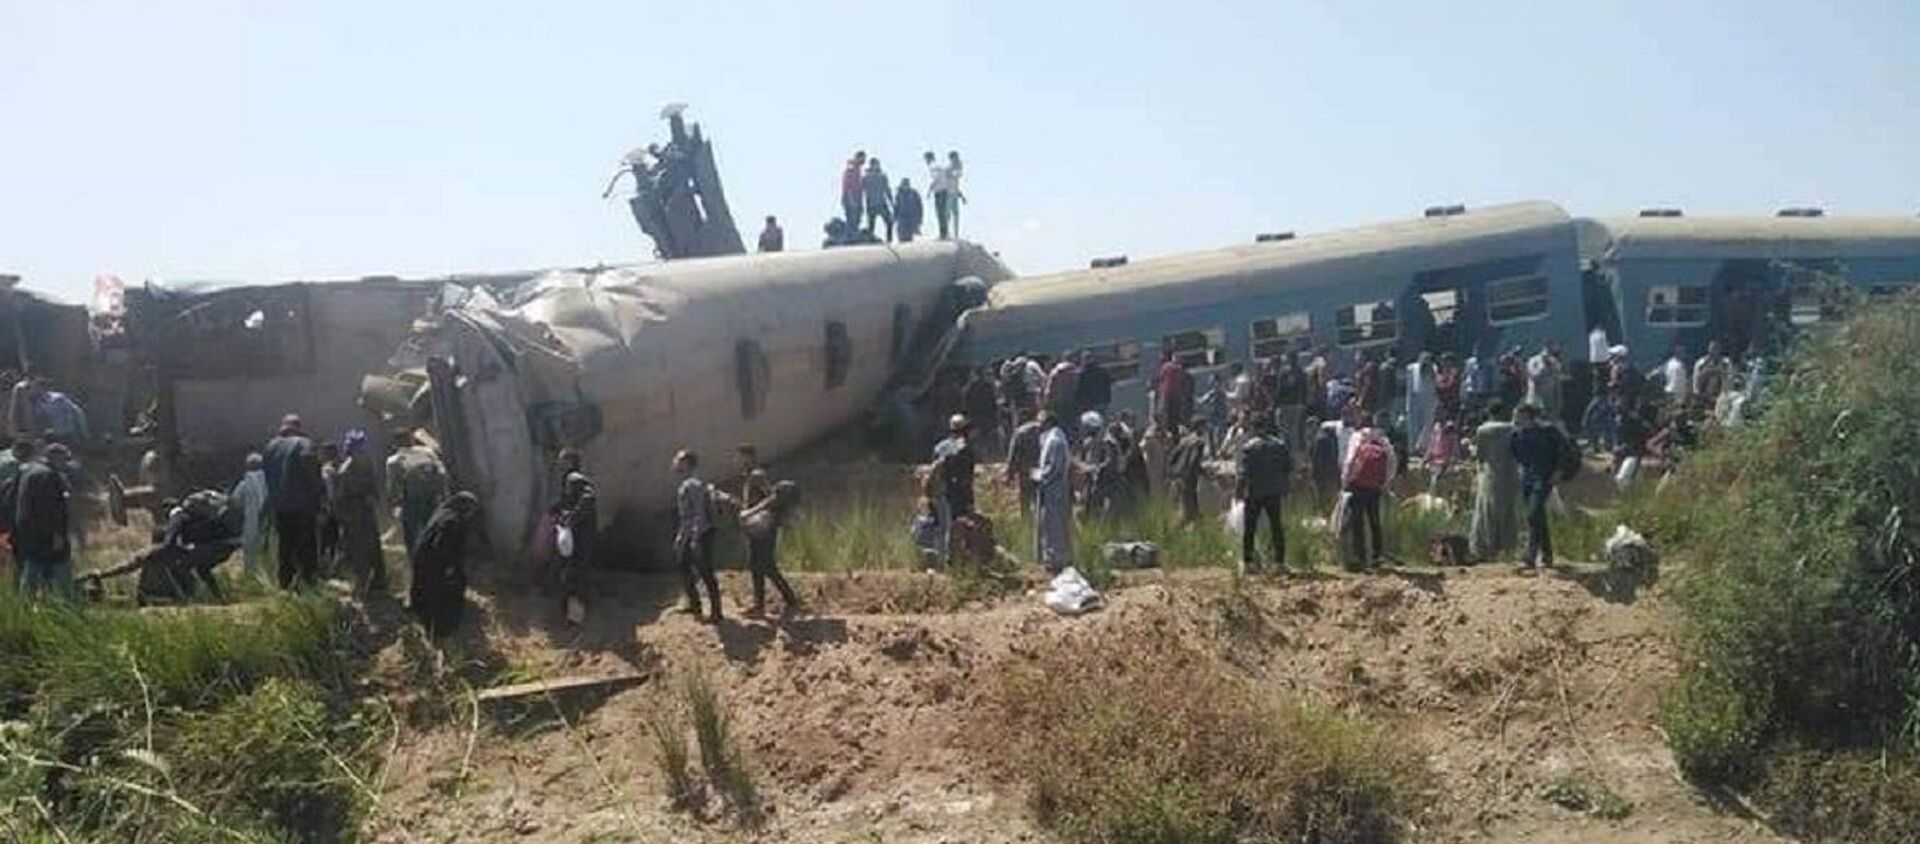 Two trains collided in Sohag, Upper Egypt - 俄羅斯衛星通訊社, 1920, 26.03.2021